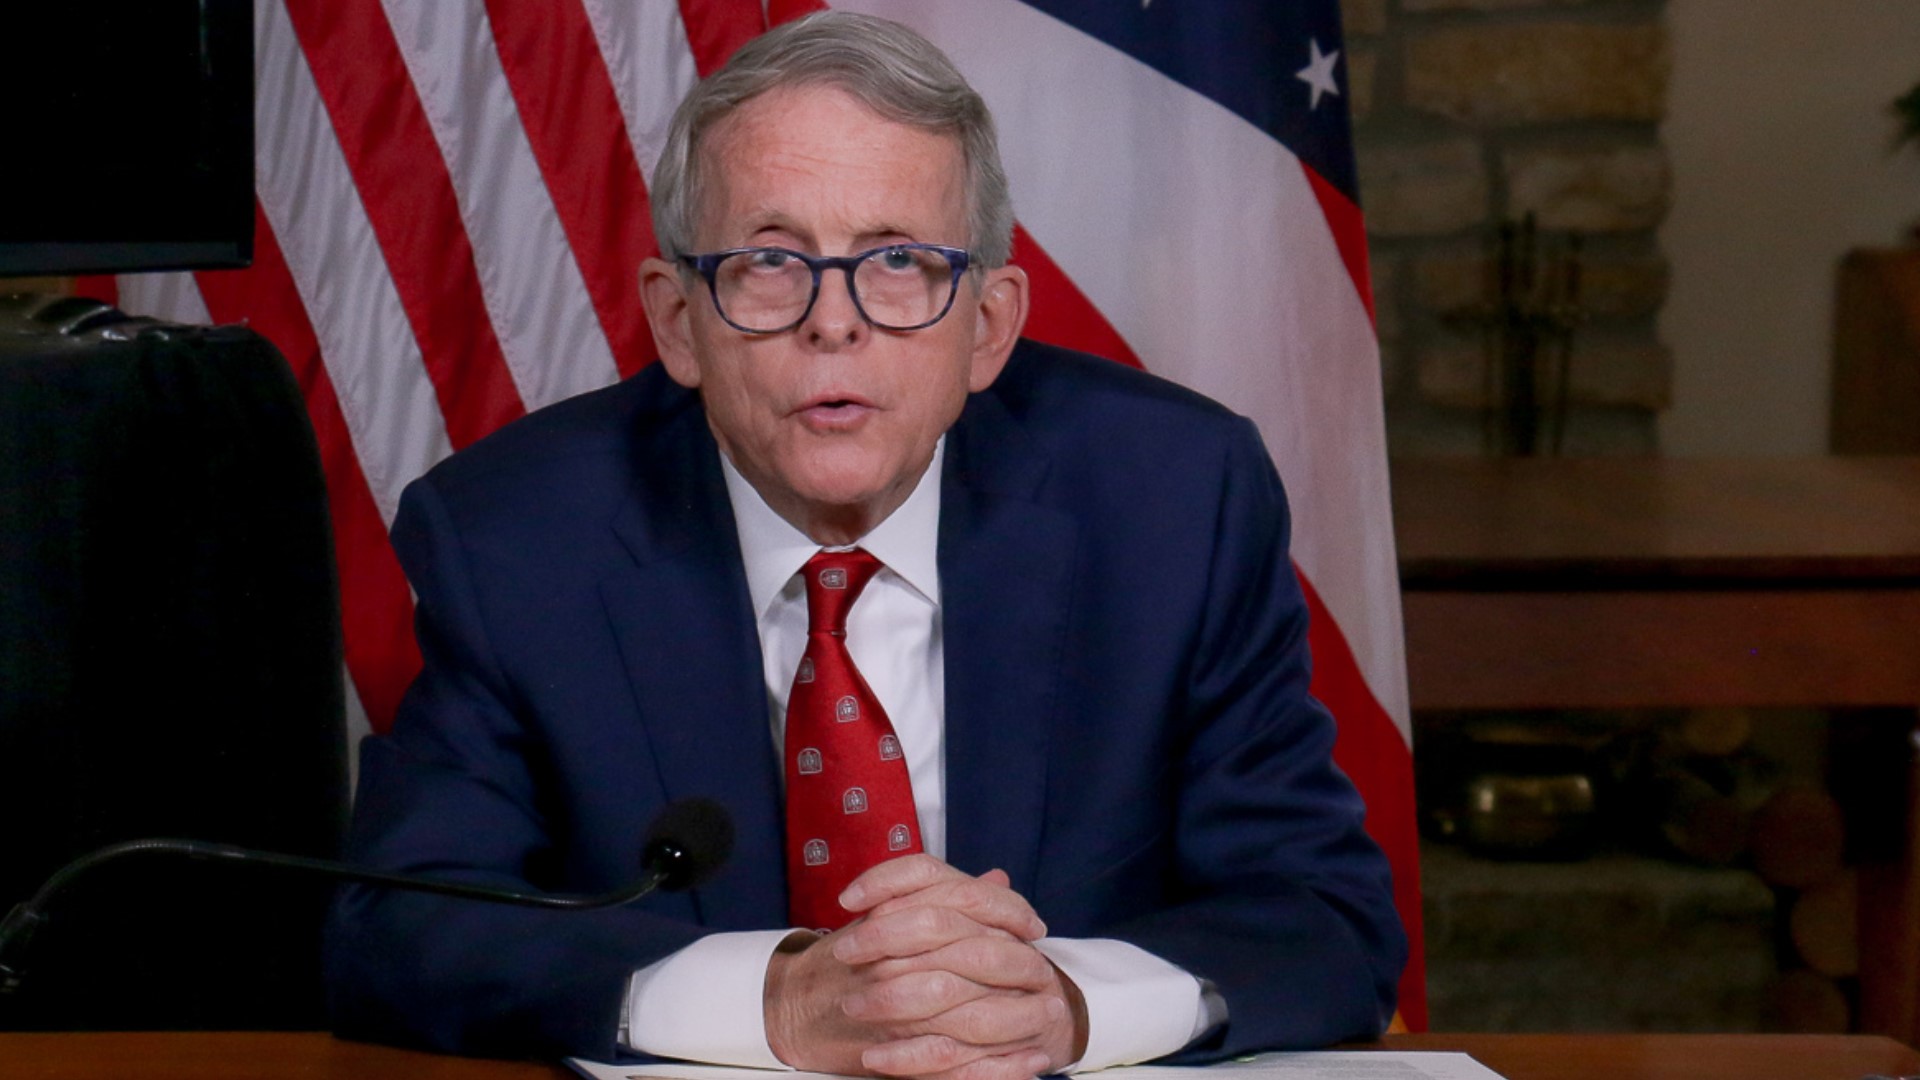 10 Investigates talked to Gov. Mike DeWine about the vaccine rollout in Ohio.